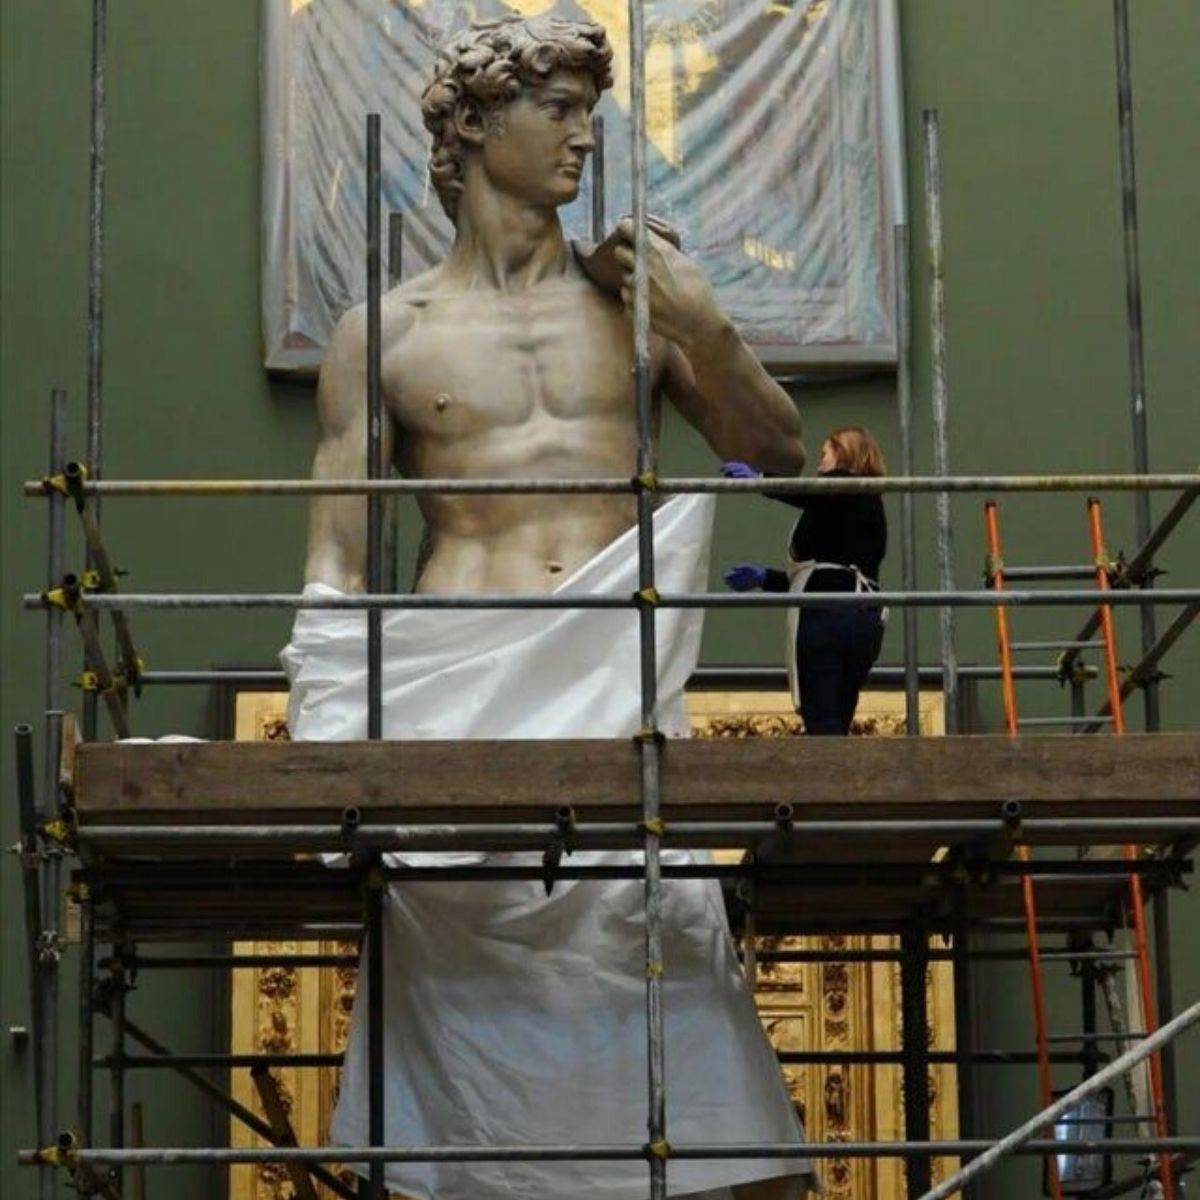 <p>Michelangelo's David is one of the most recognizable statues in history, but something a lot of people don't realize is that it's far bigger than you think. </p> <p>In pictures, it seems like it's a life-size statue of a human and would stand at 5 or 6 feet tall, but it actually stands 17 feet high!</p>